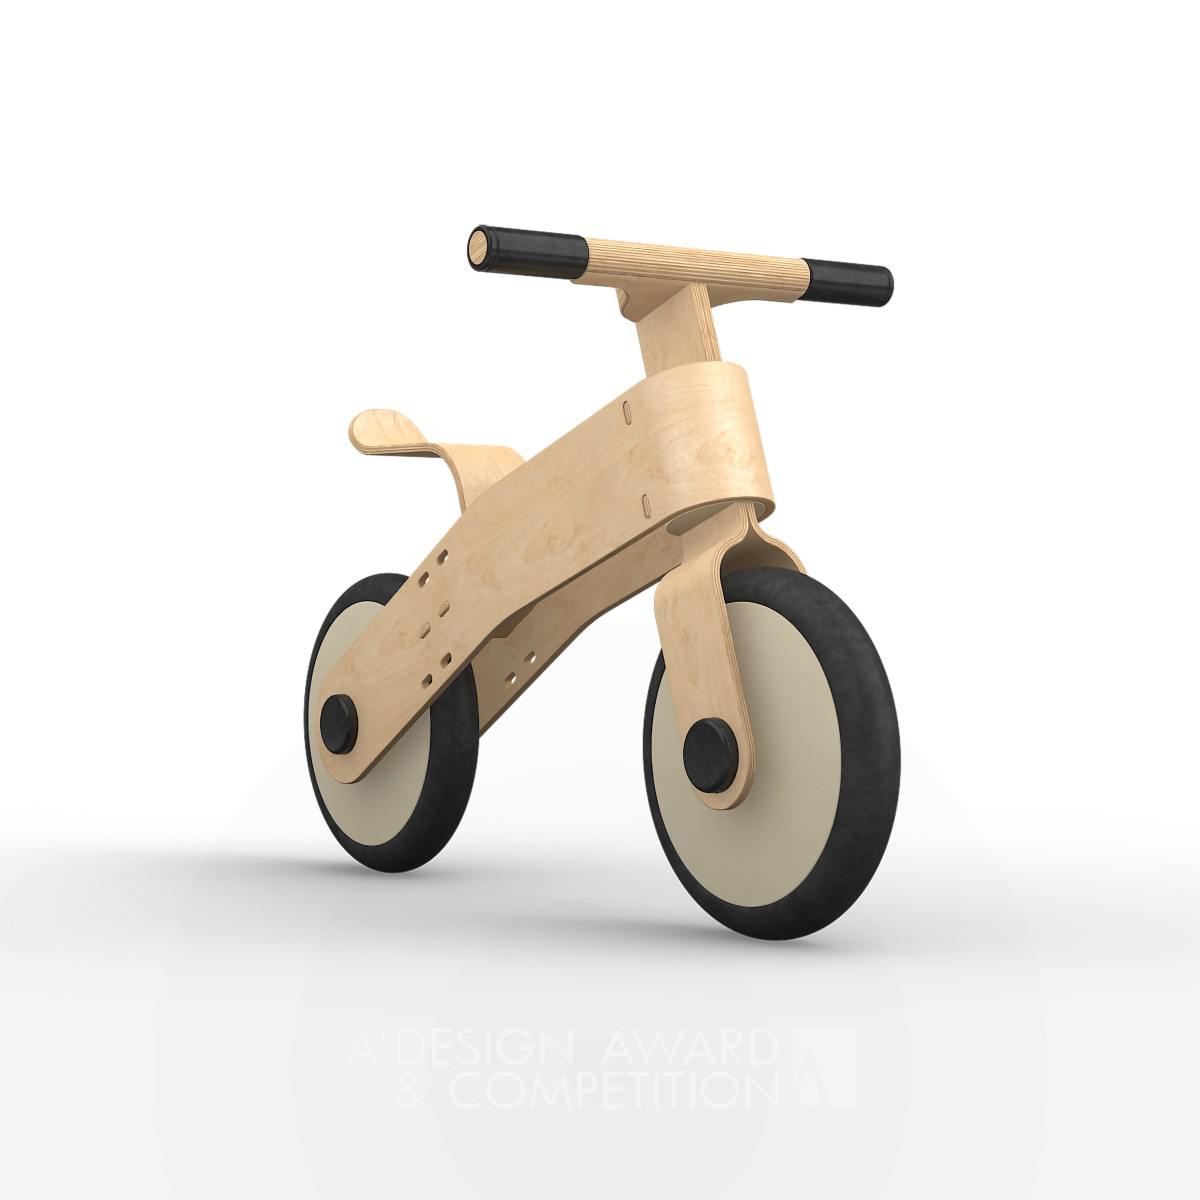 Aldis Blicsons wins Iron at the prestigious A' Toys, Games and Hobby Products Design Award with Choppy Wooden Balance Bike for Kids.